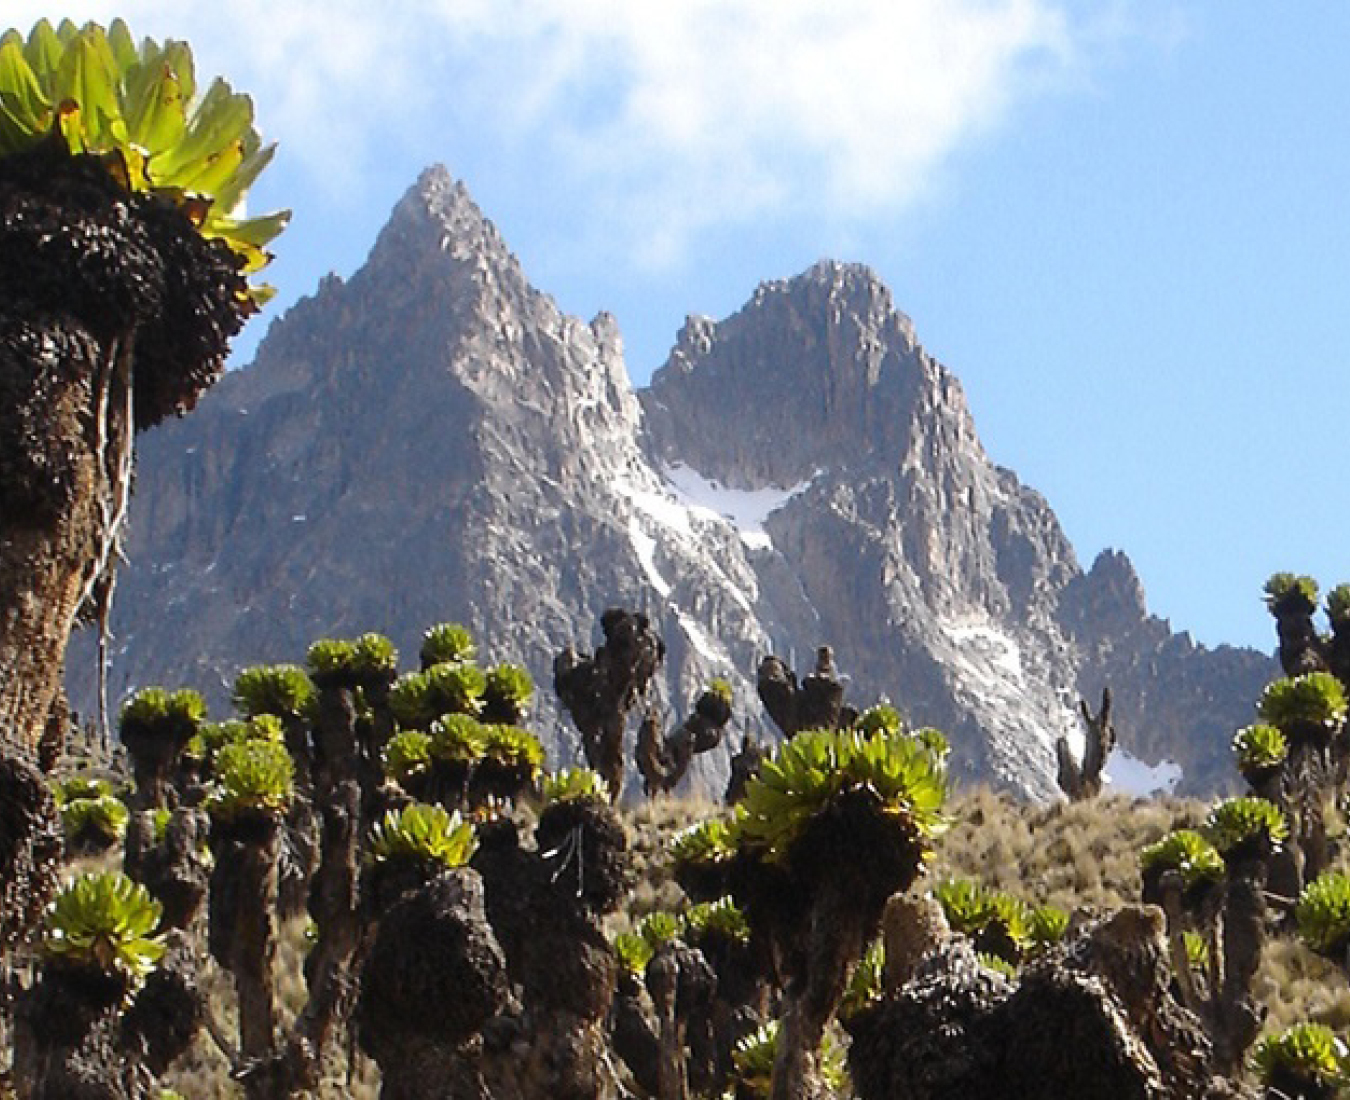 The jagged peaks of Mount Kenya rise above the exotic equatorial flora of the surrounding moorlands.